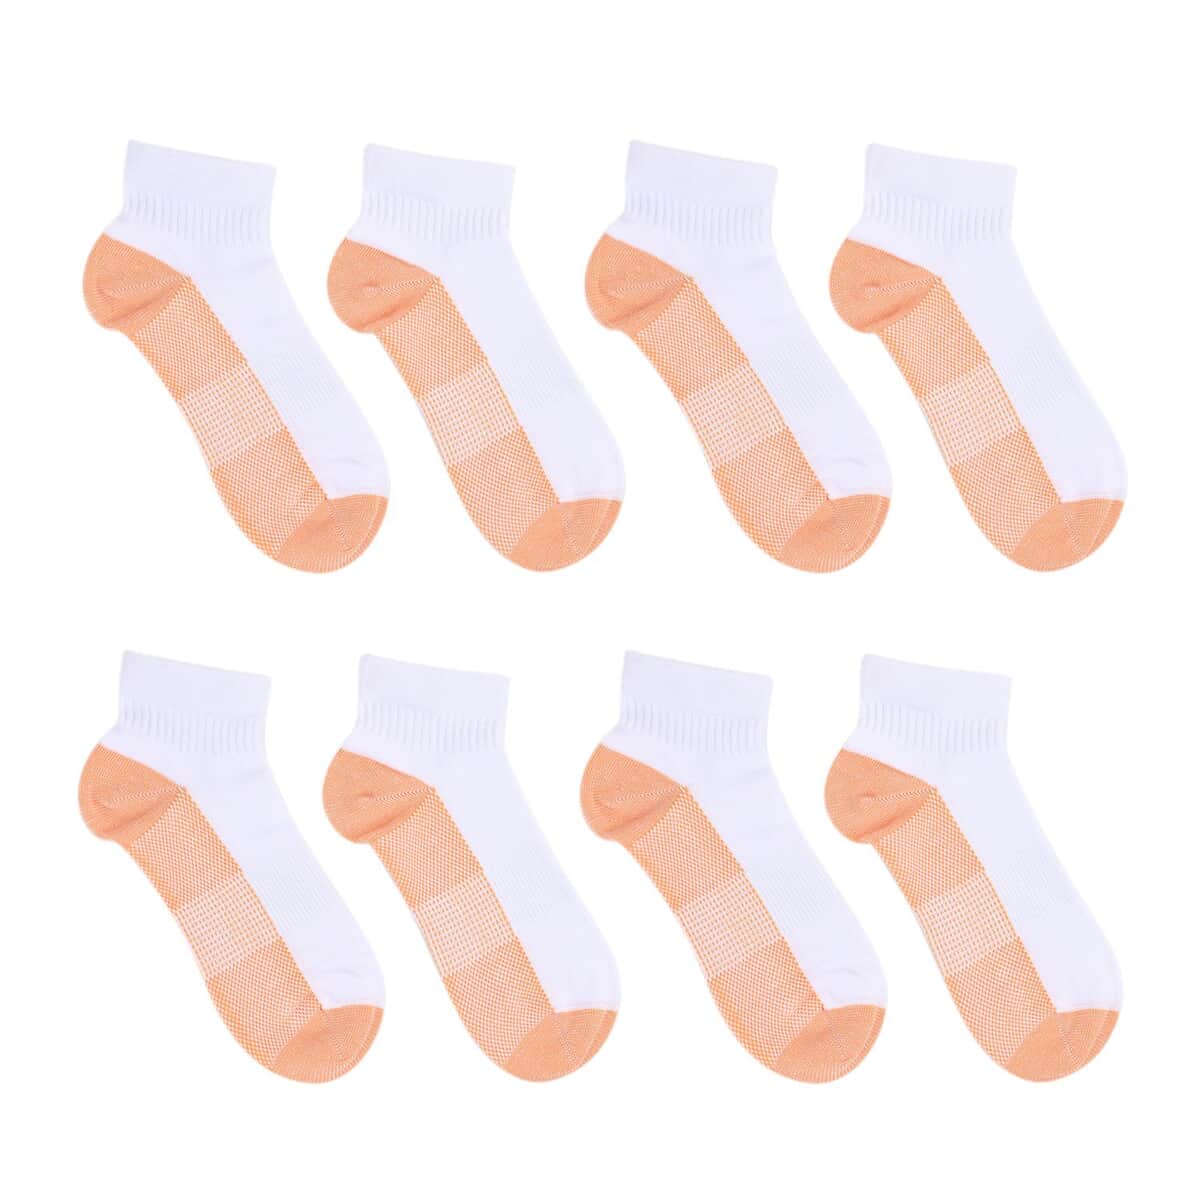 Set of 4 Pairs of Ankle Length Odor Free Copper Compression Socks For Men And Women, Premium Material Moisture Wicking Unisex Copper Infused Socks - White (L/XL) image number 0